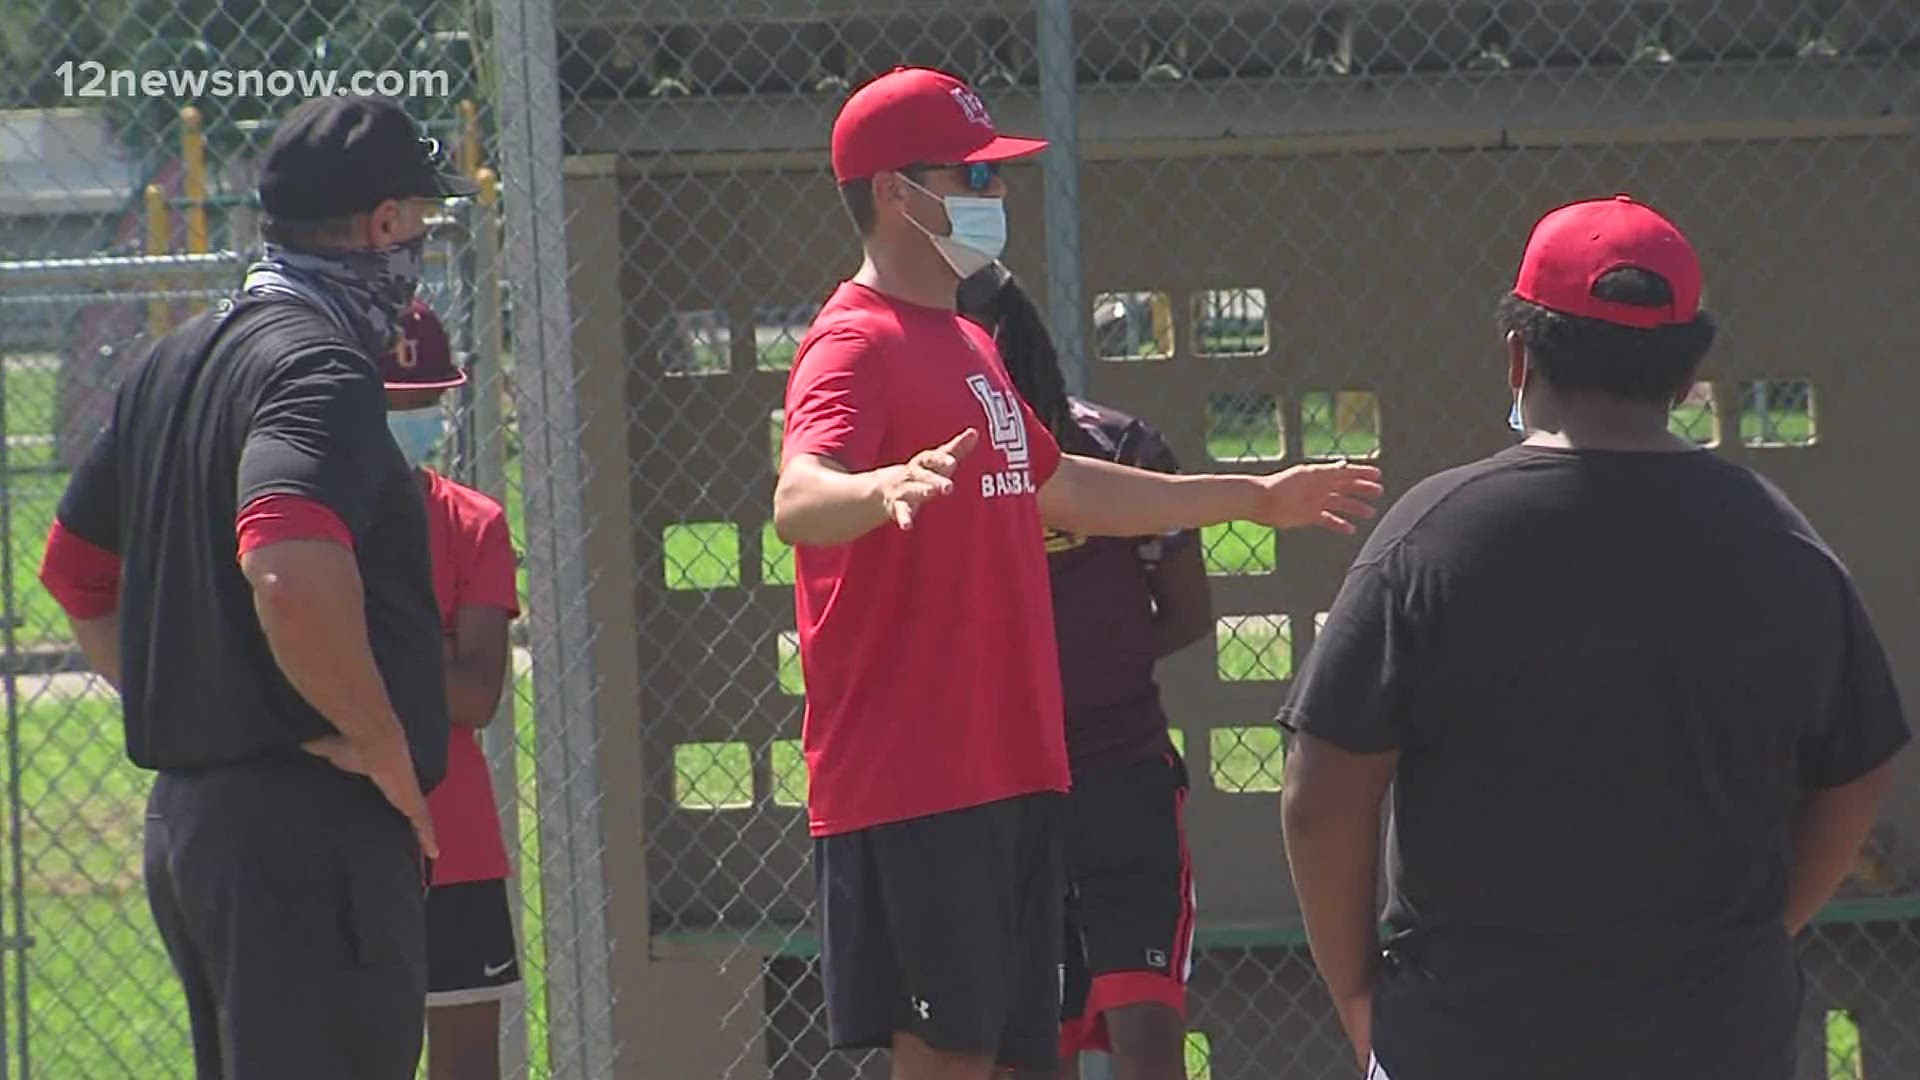 Lamar coaching staff puts on free camp for kids in Port Arthur